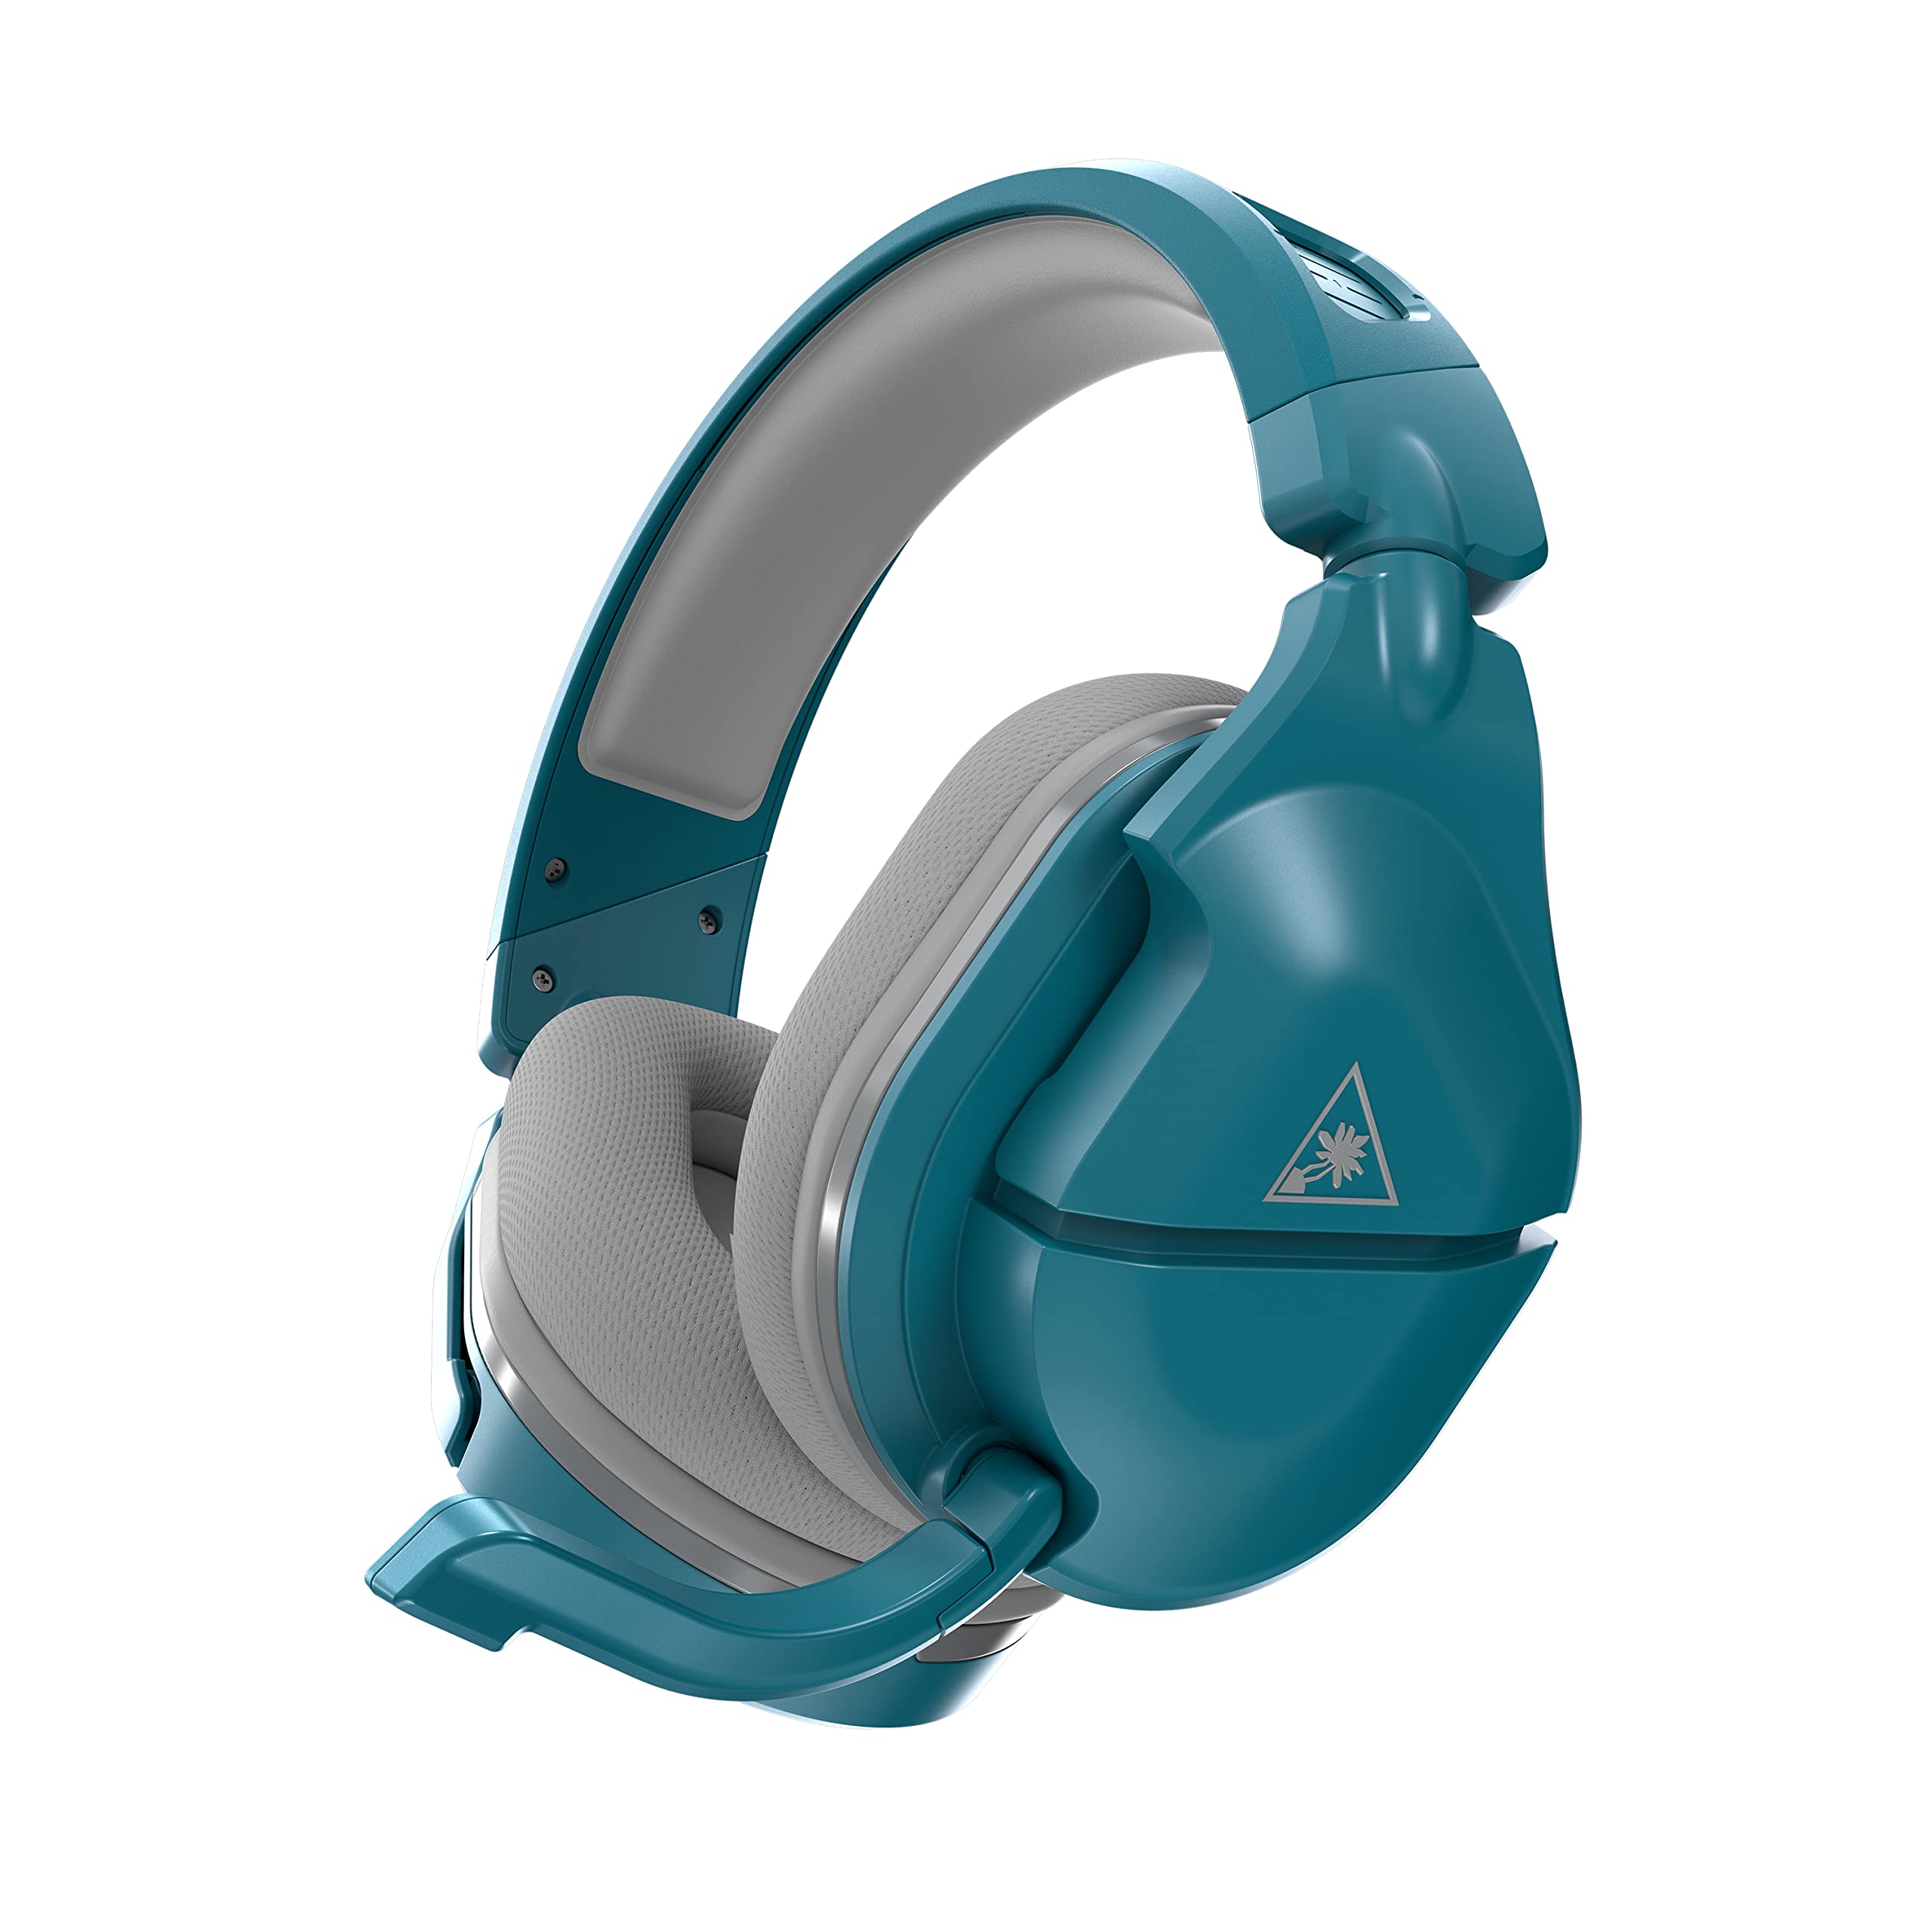 Turtle Beach Stealth 600 Gen 2 MAX Wireless Multiplatform Amplified Gaming Headset for Xbox Series X|S, Xbox One, PS5, PS4, Nintendo Switch, PC, and Mac with 48+ Hour Battery – Teal